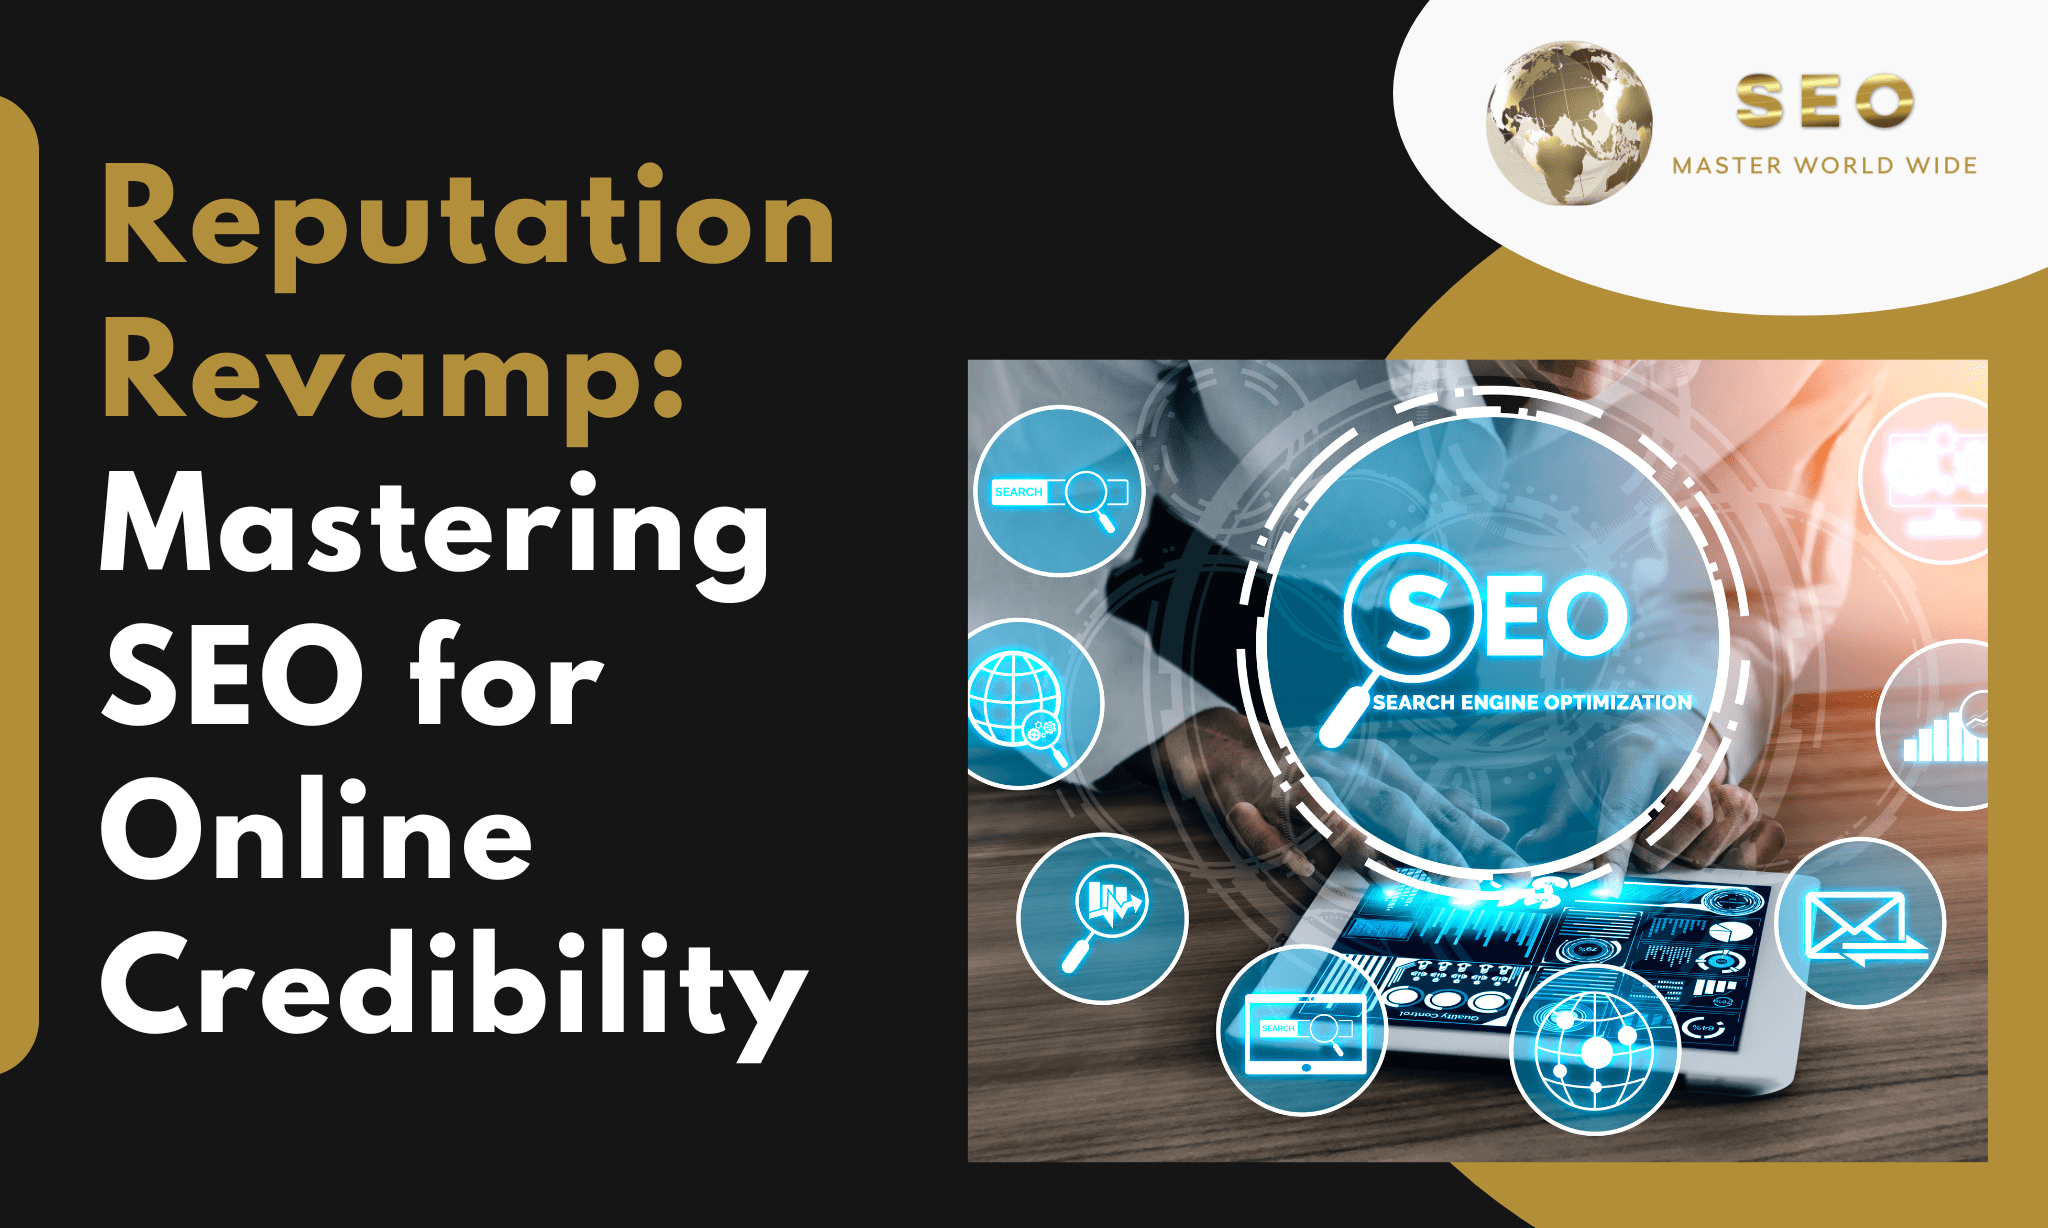 Take Control of Your Online Reputation with SEO Reputation Management